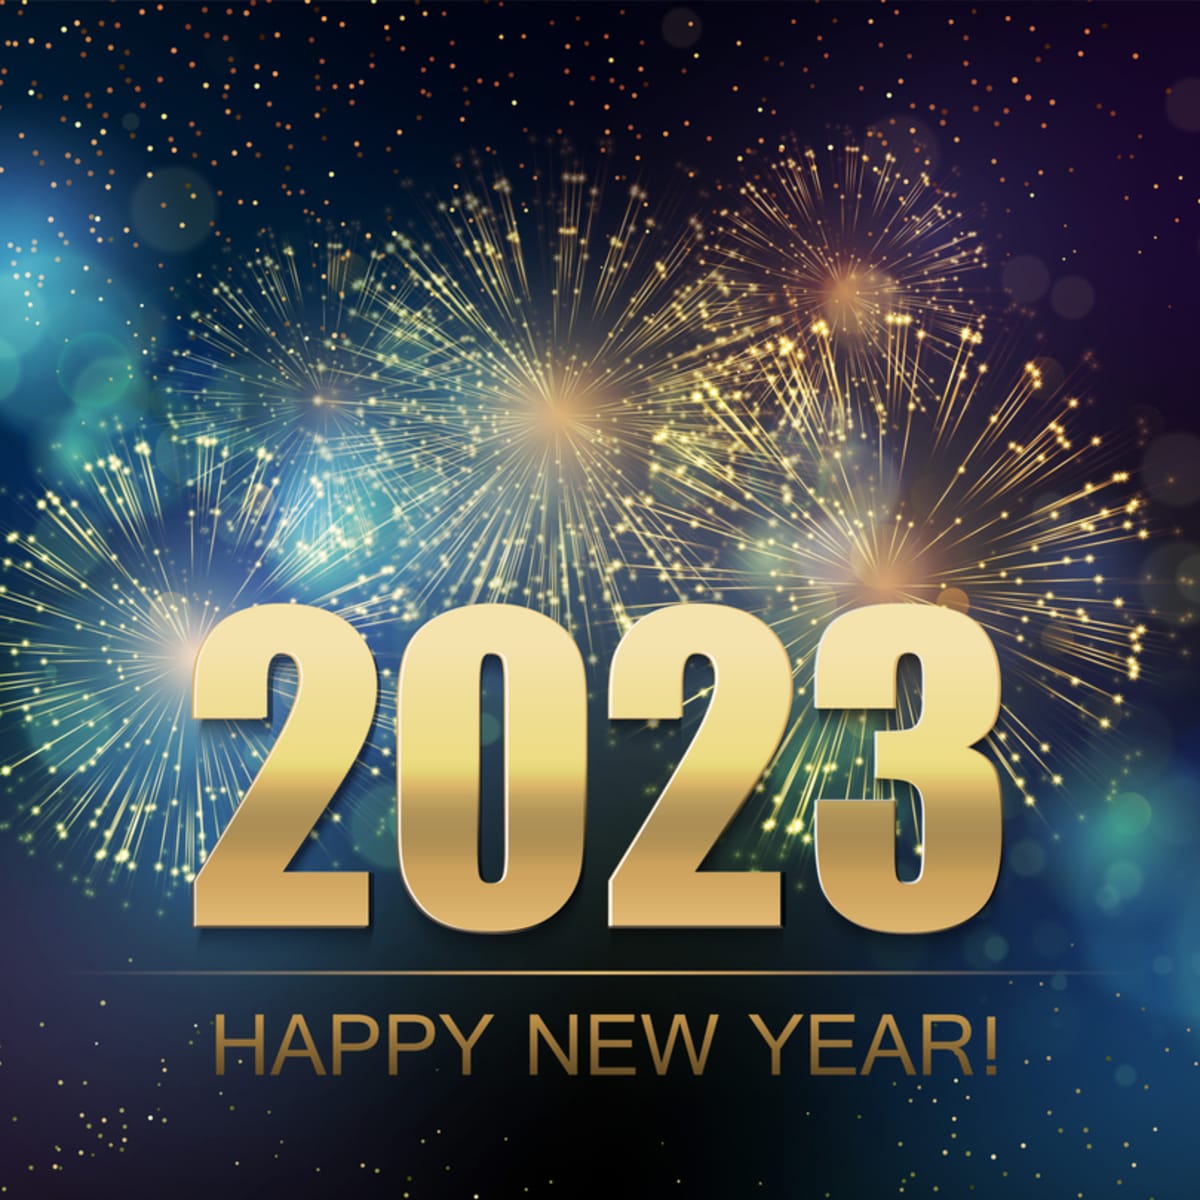 Happy New Year 2023! – A Letter From WETROYES